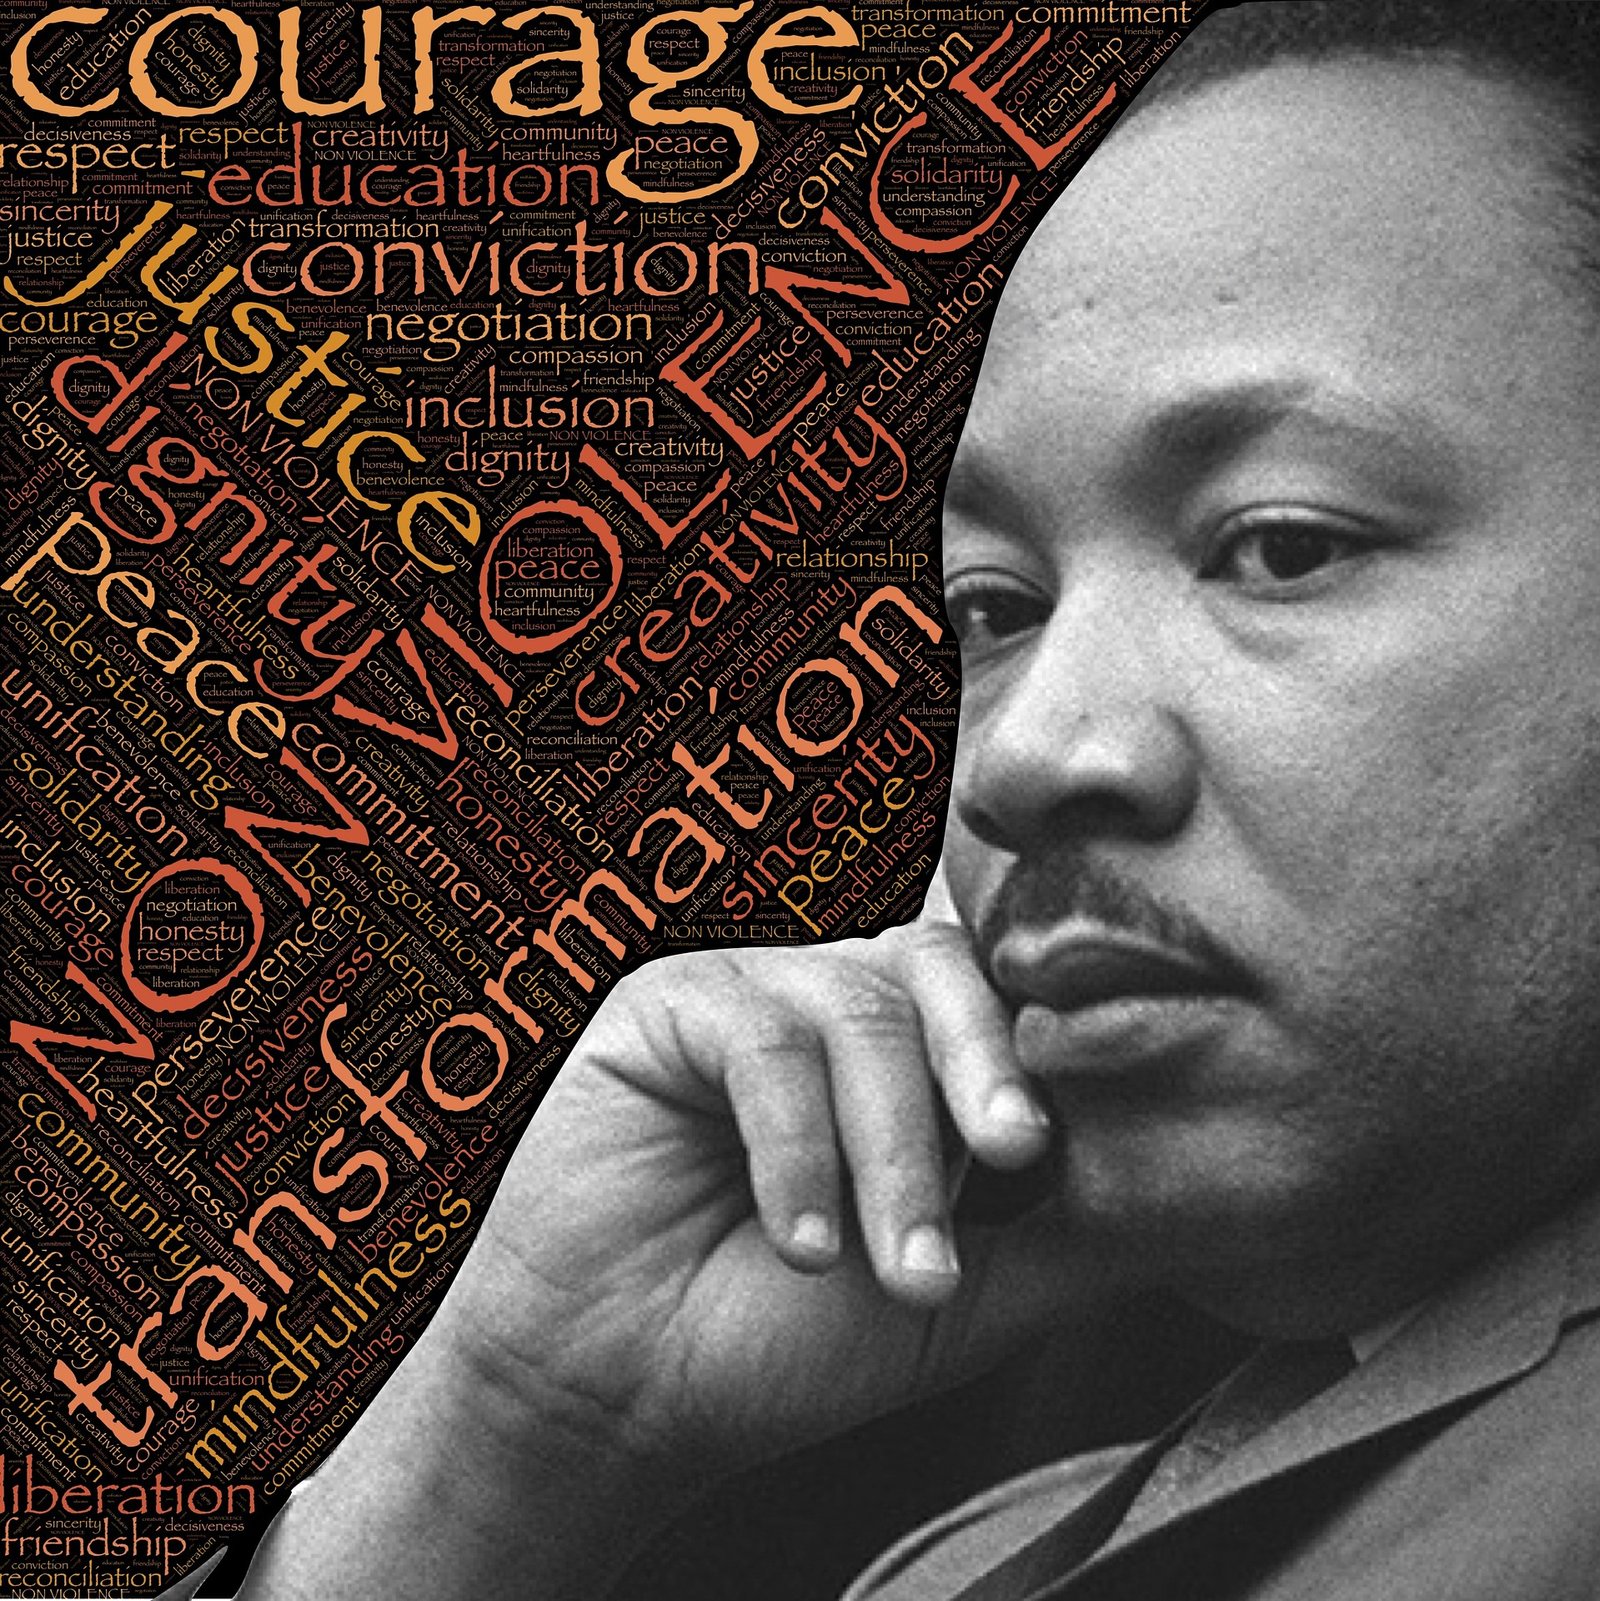 Martin Luther King Day Leadership Lessons: Inspiring Change and Unity